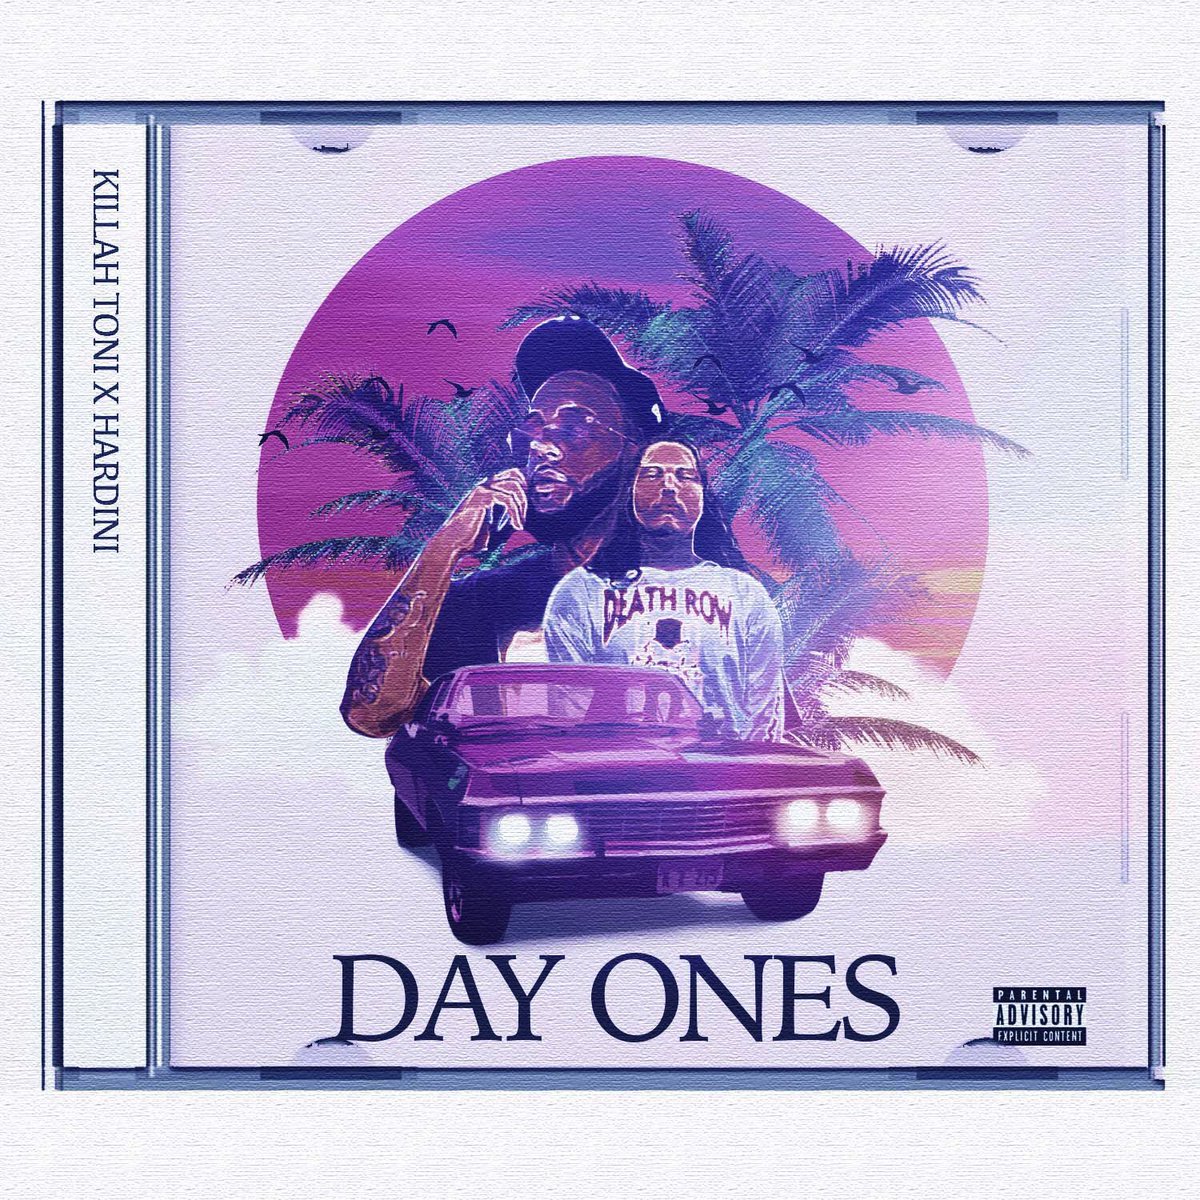 This Thursday @ 9:00 PM PST my new track “Day Ones” featuring Hardini drops on all platforms! If you miss that classic #CaliRap sound then you’ll love this one 💯